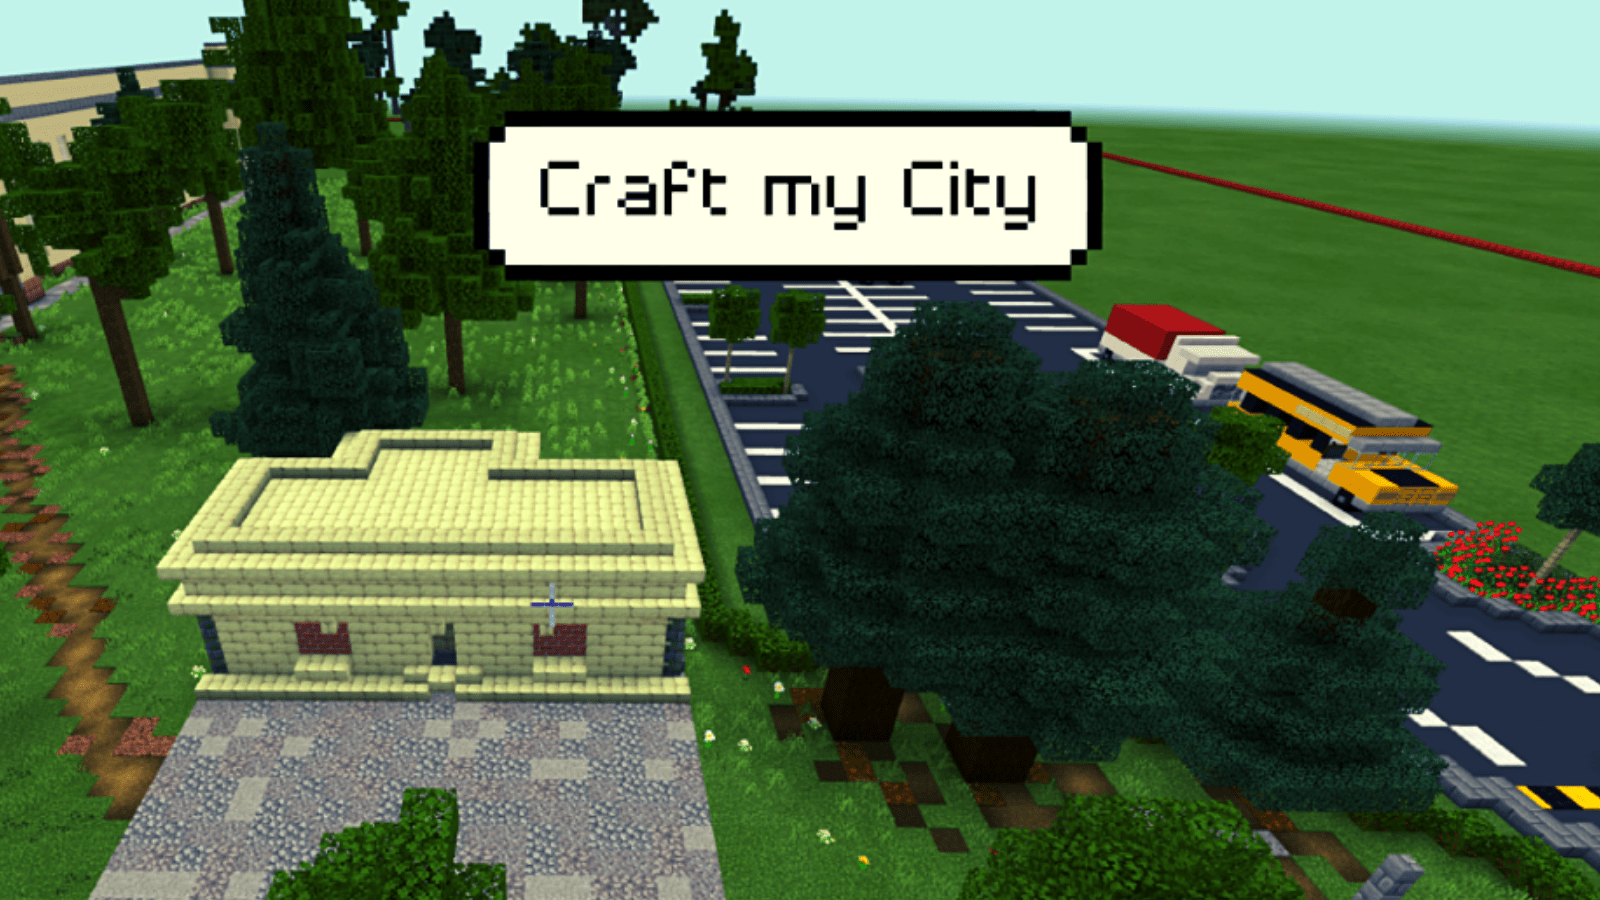 Featured image for “Using Minecraft to improve Cardiff’s sustainability plans”